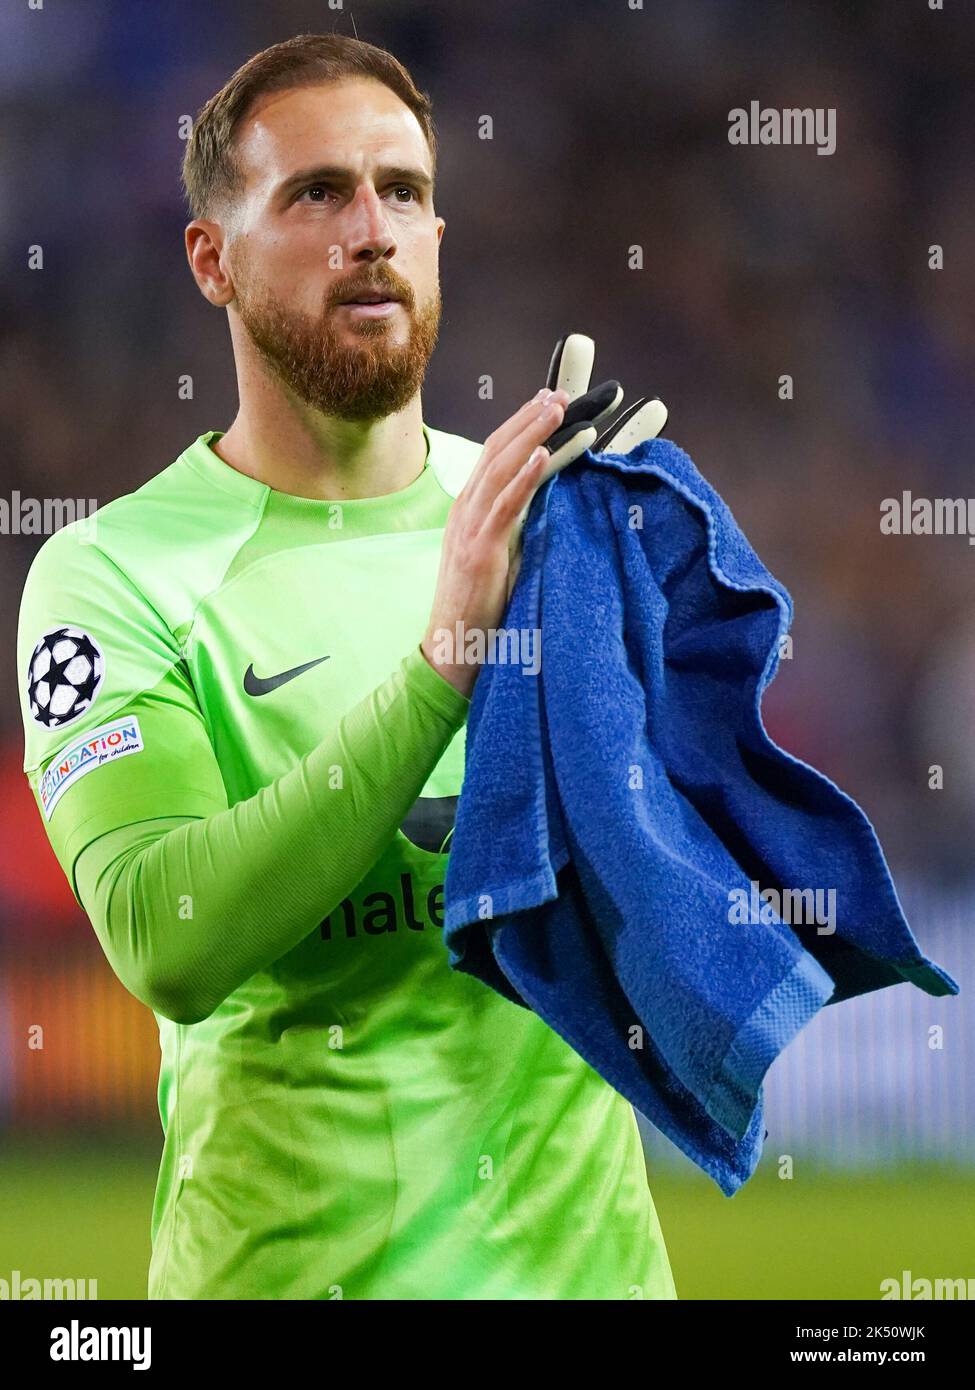 BRUGGES, BELGIUM - OCTOBER 4: Jan Oblak of Atletico Madrid looks dejected and applauds for the fans after the Group B - UEFA Champions League match between Club Brugge KV and Atletico Madrid at the Jan Breydelstadion on October 4, 2022 in Brugges, Belgium (Photo by Joris Verwijst/Orange Pictures) Stock Photo